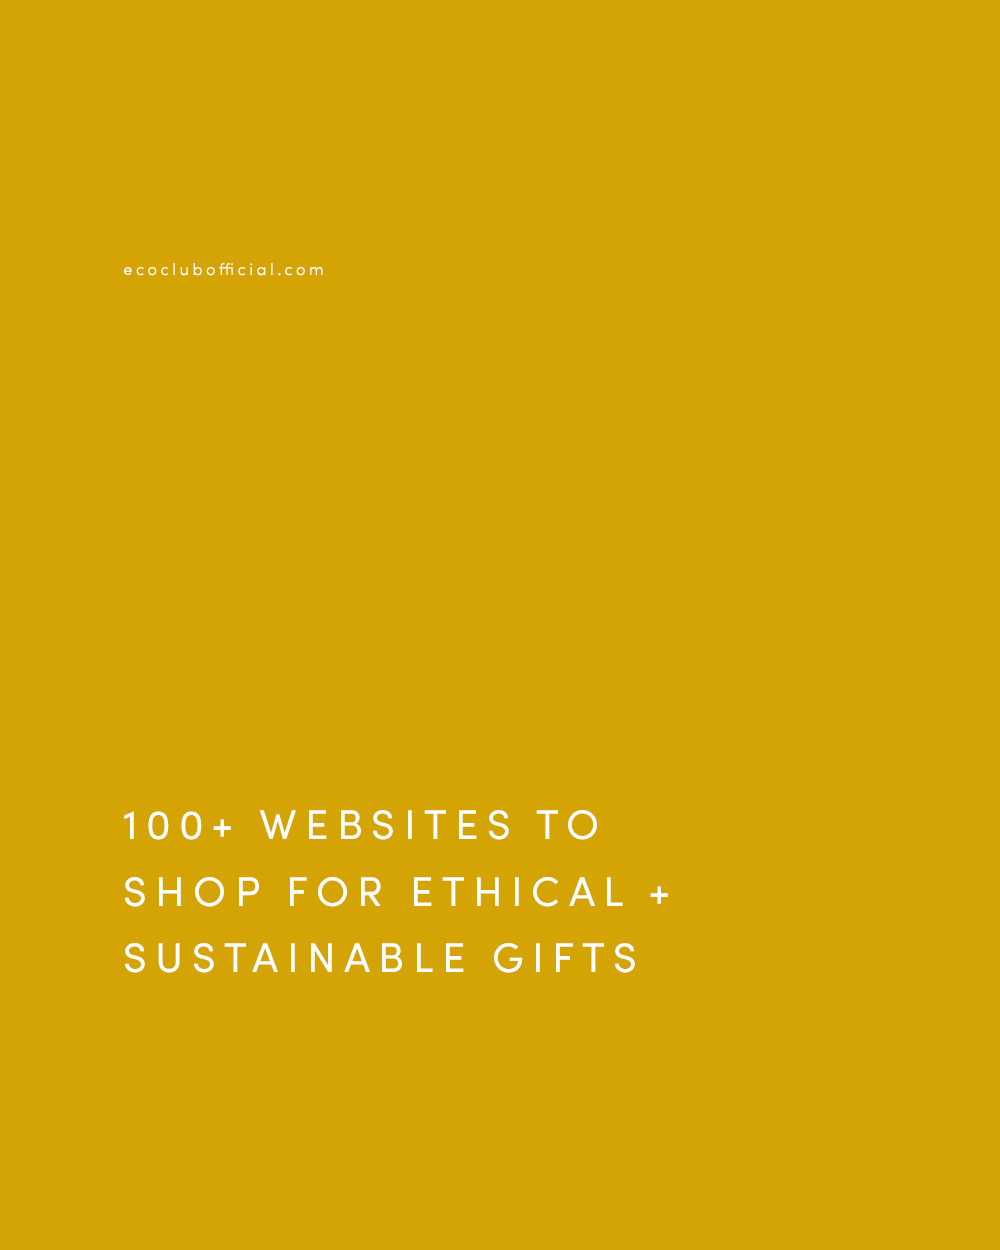 100+ Websites to Shop Small for Ethical & Sustainable Gift Ideas (Home, Lifestyle, Fashion, Beauty, & Wellness) via eco club